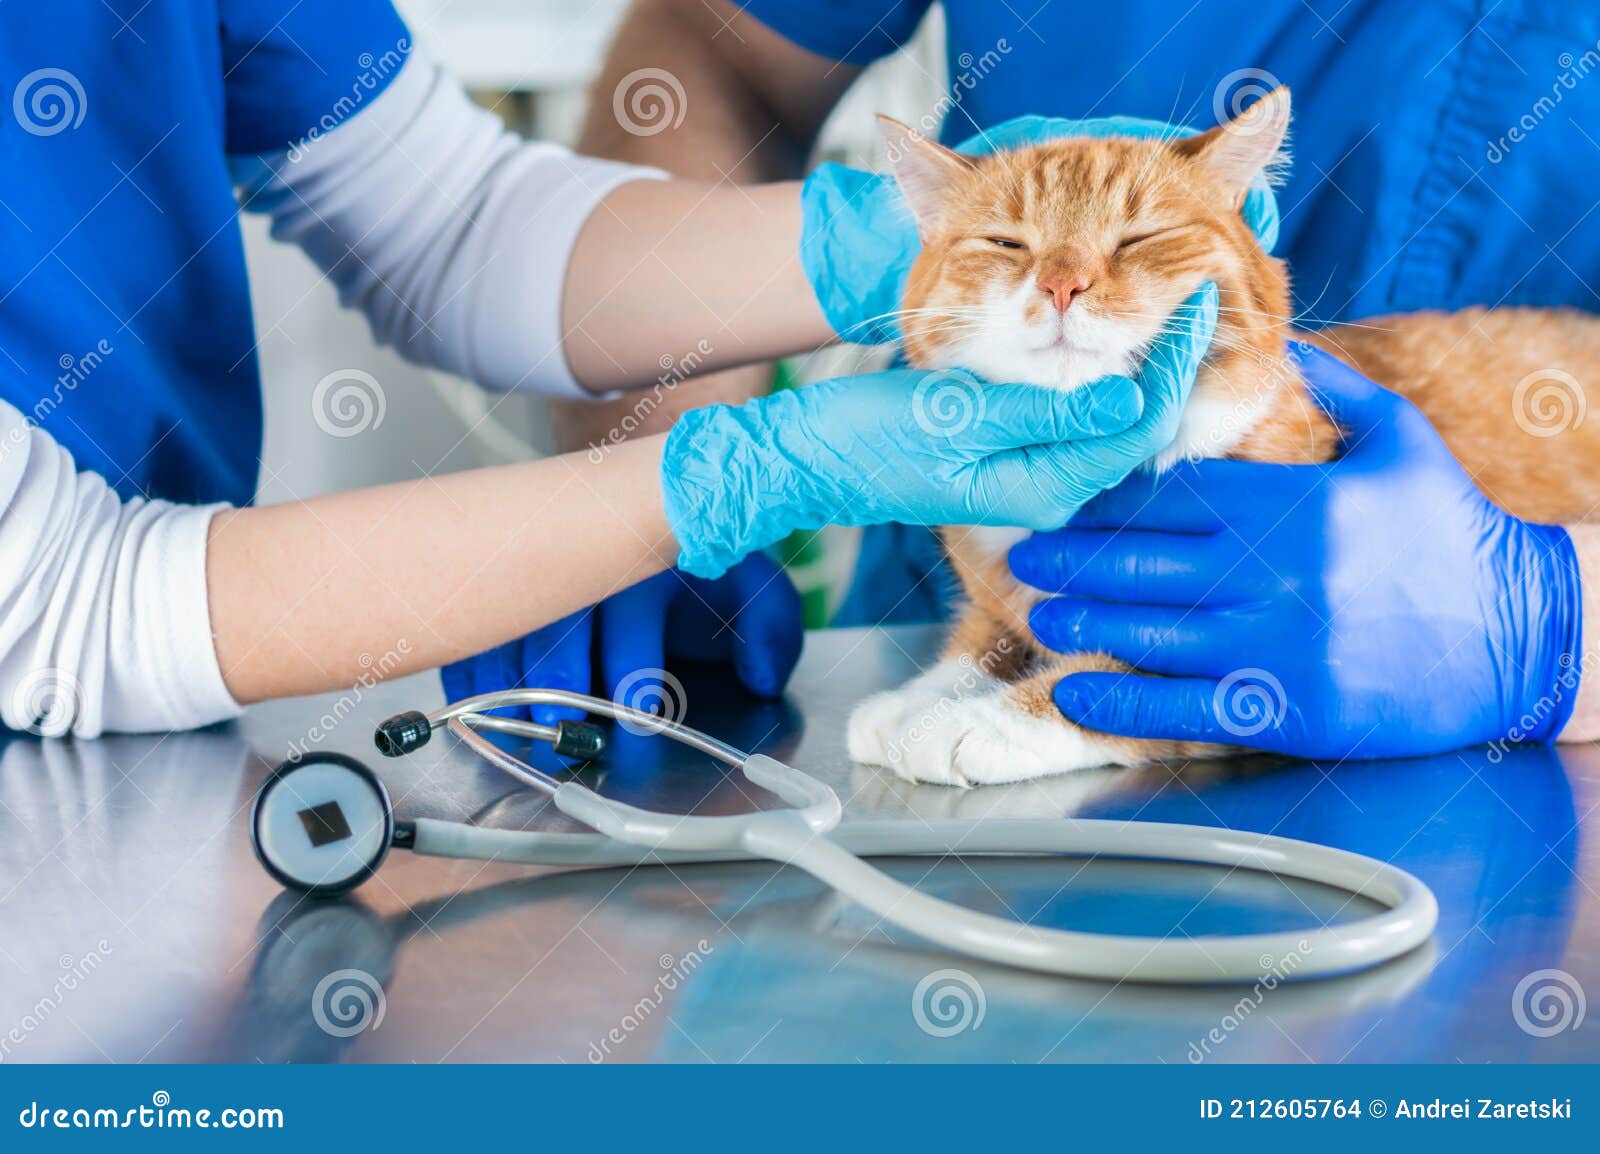 Portrait of a Funny Ginger Cat on the Table in the Operating Room.  Veterinary Medicine Concept Stock Photo - Image of checkup, love: 212605764